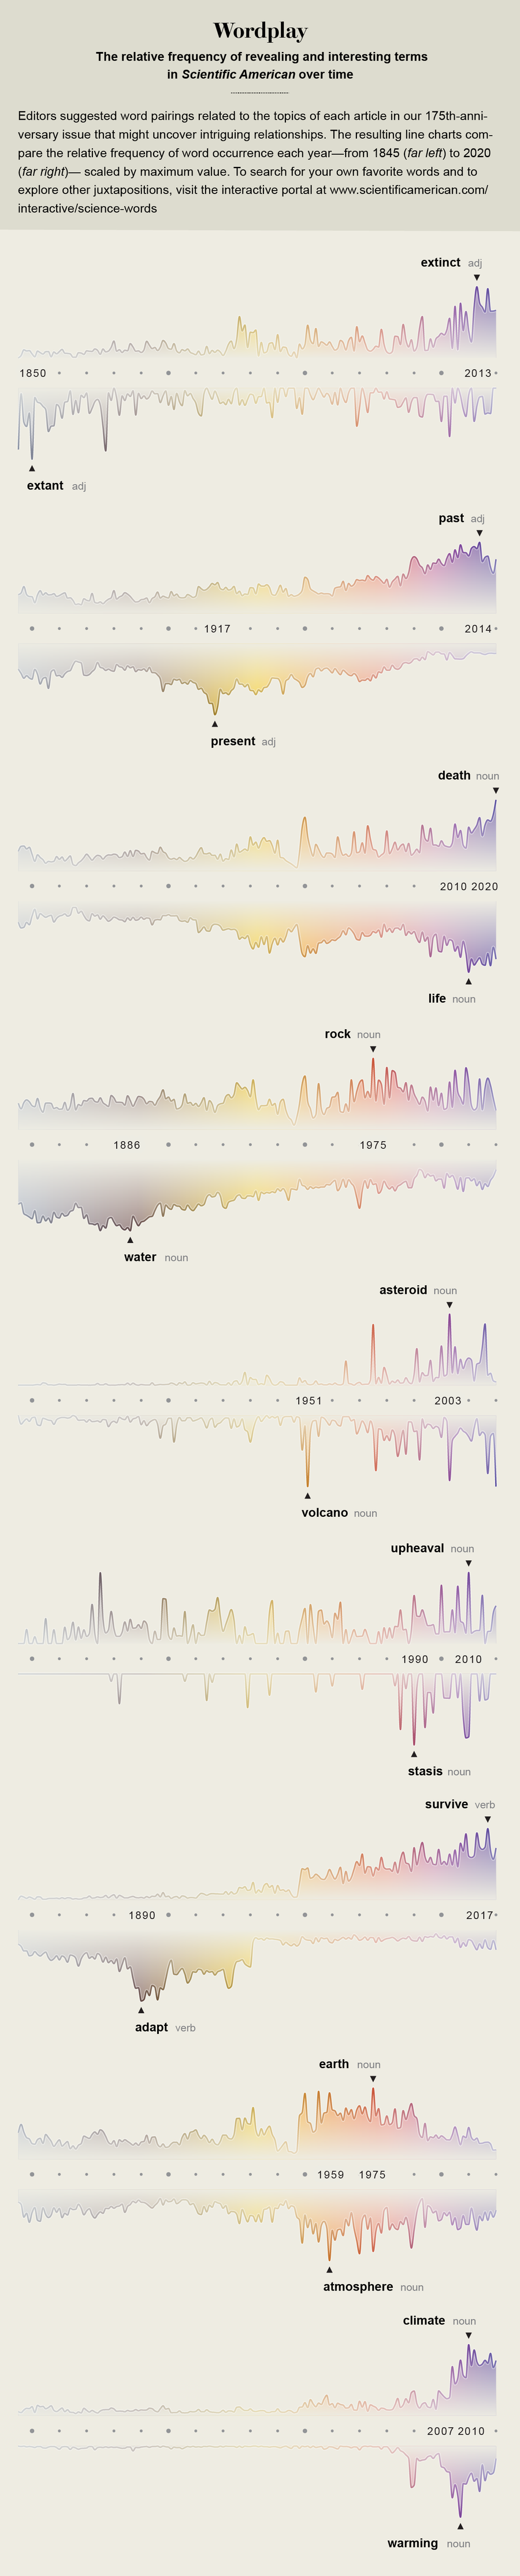 In honor of Scientific American’s 175th anniversary: Relative frequency of terms in the magazine, from 1845 to the present.